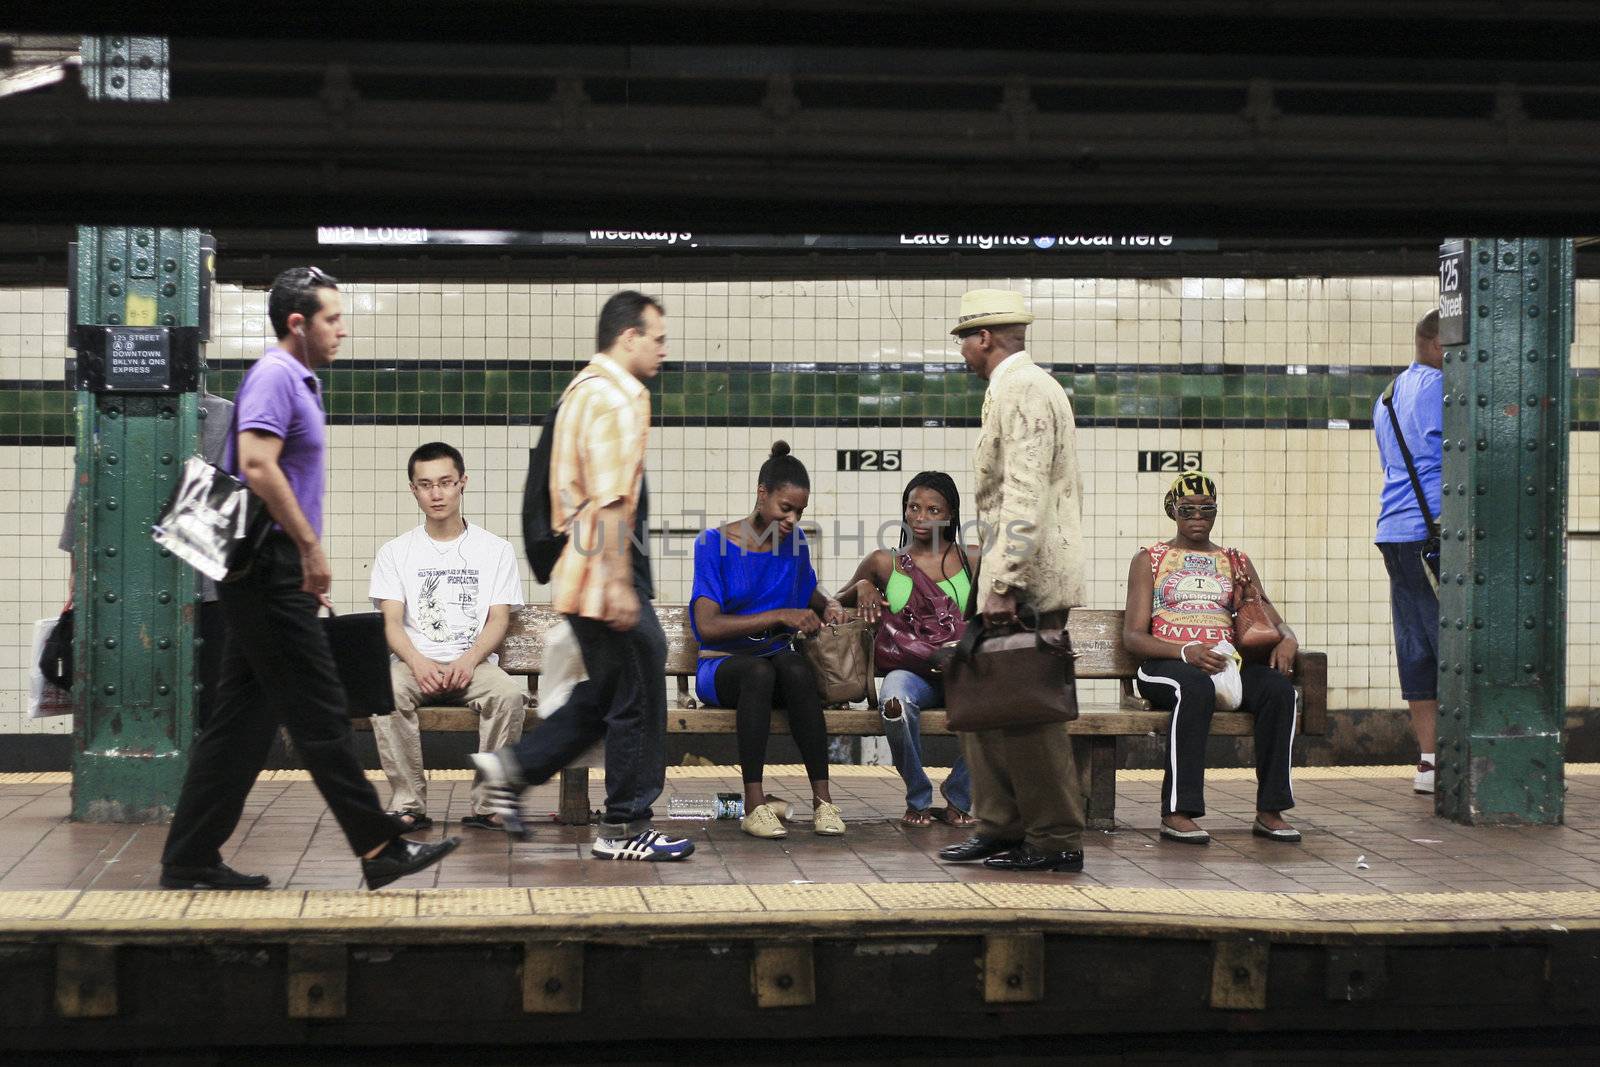 People waiting in the subway in New York